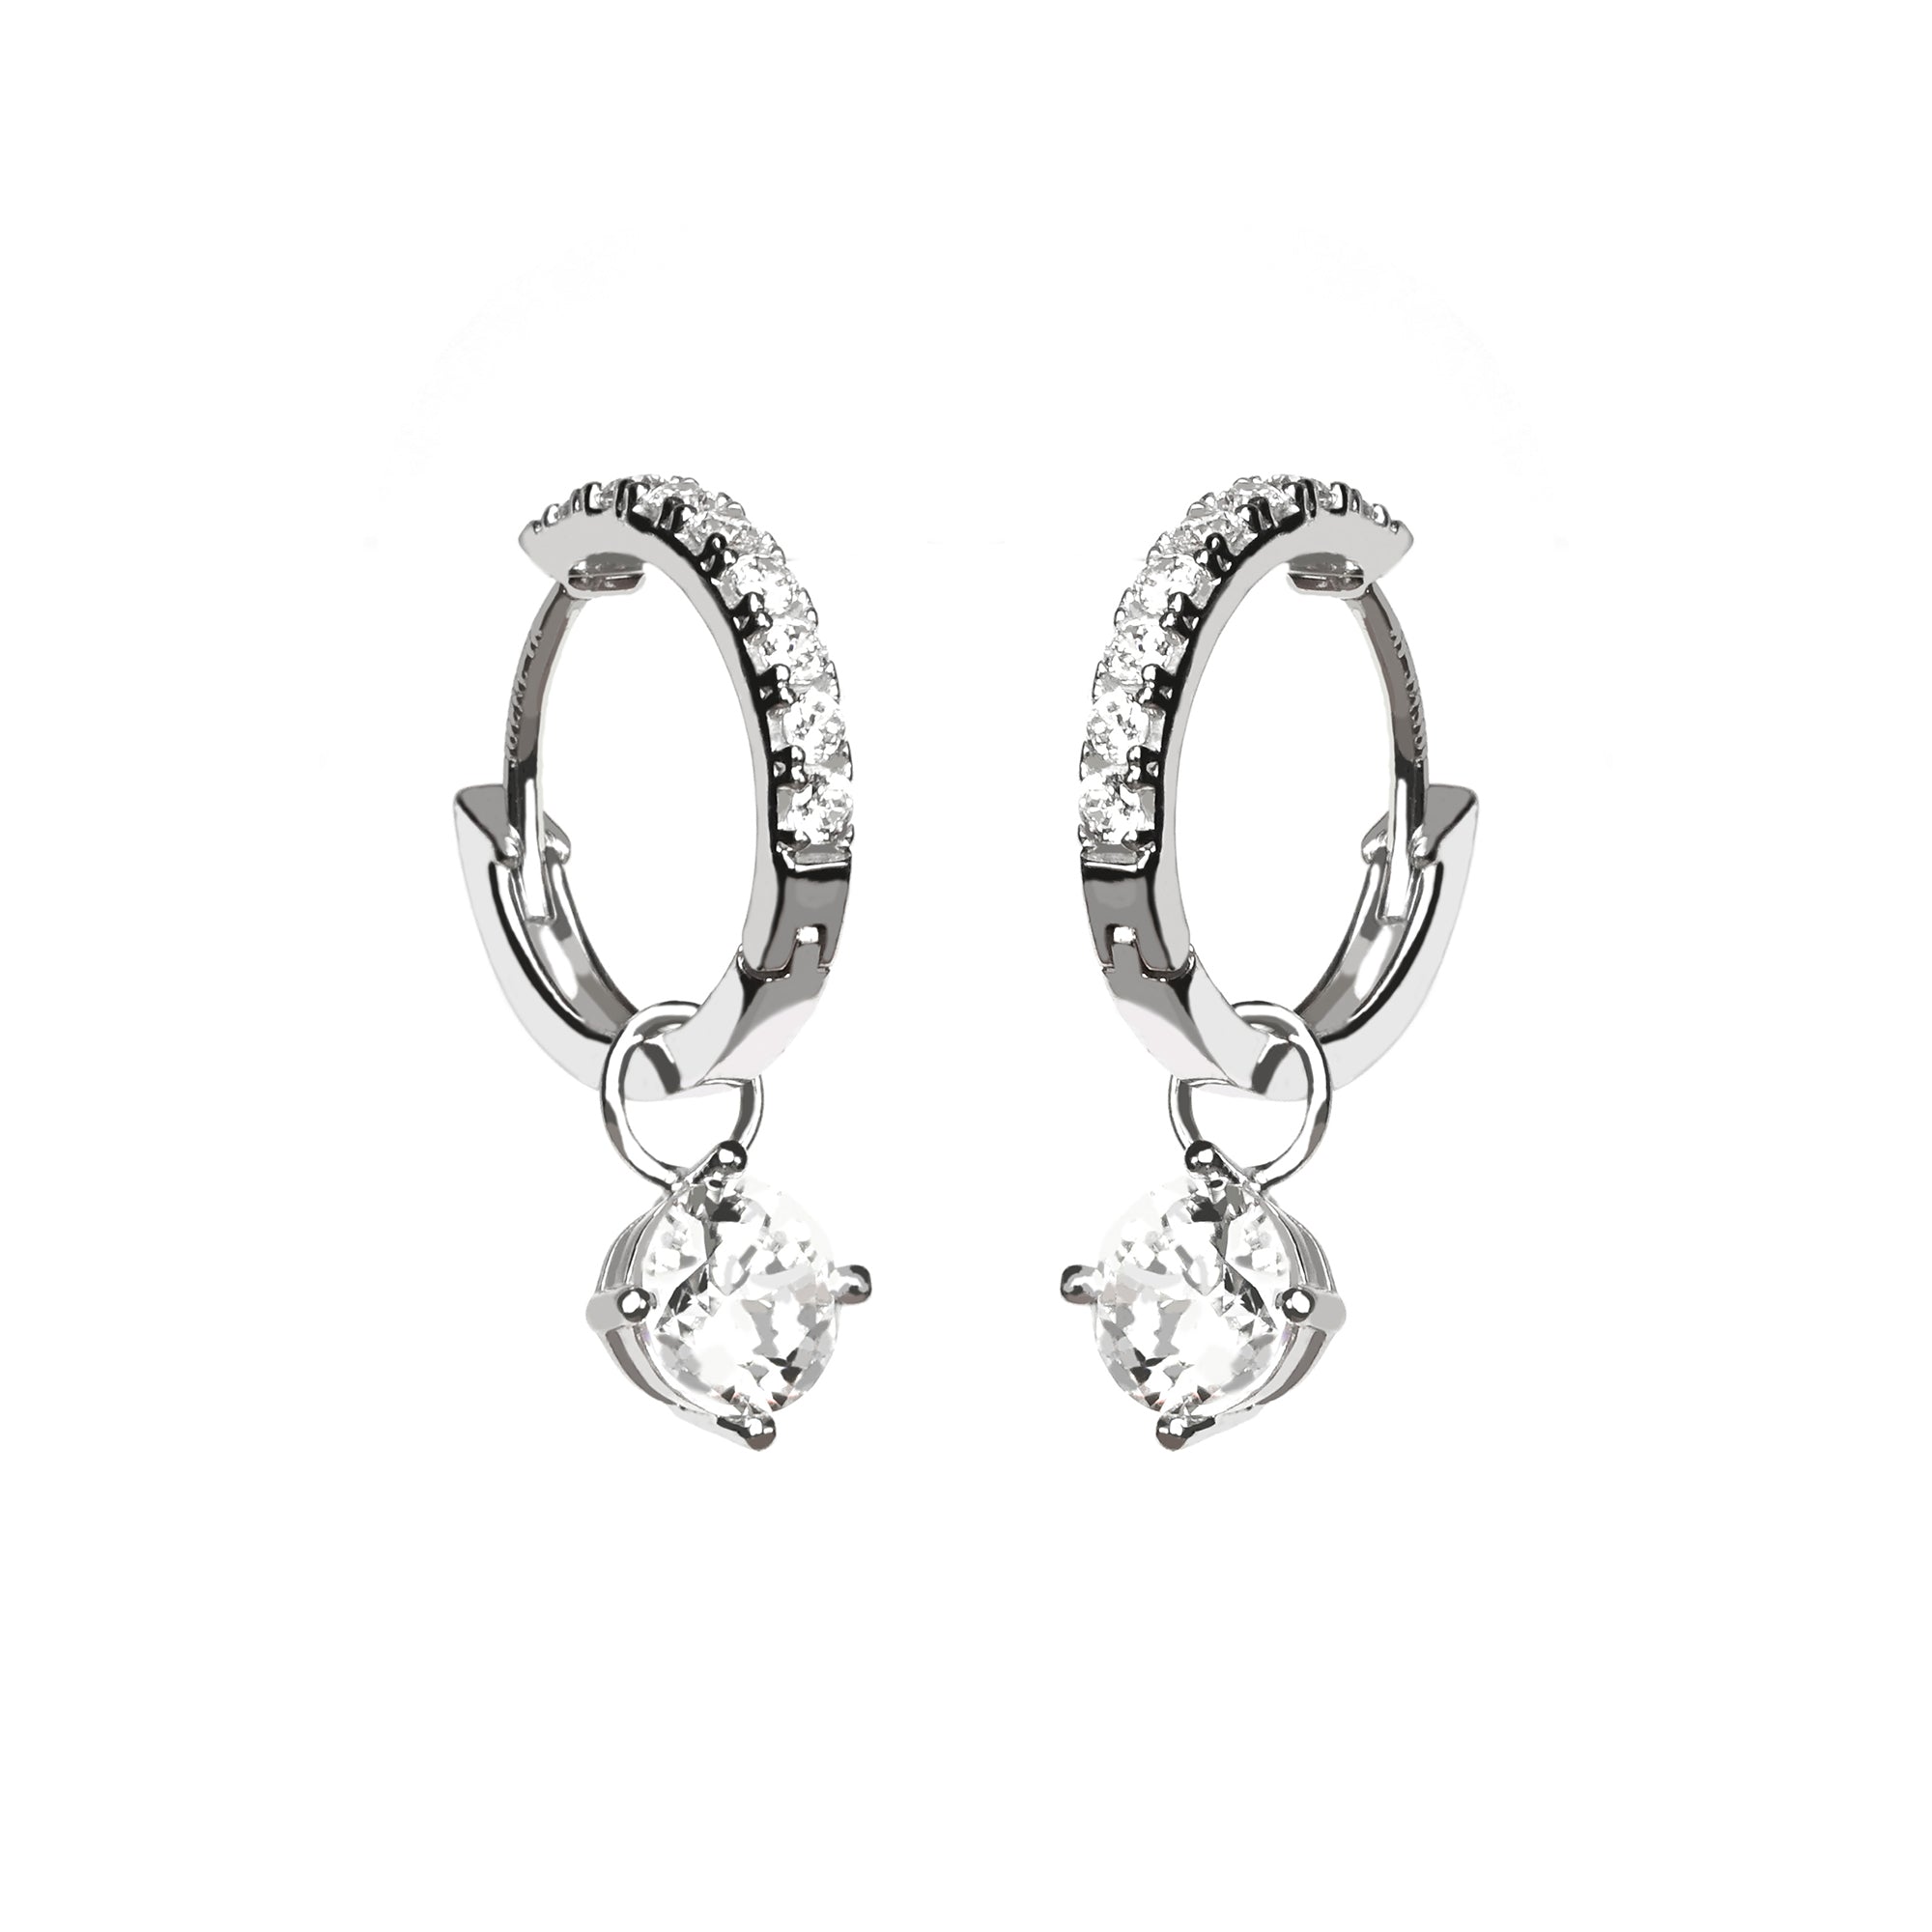 Anting Emas 7k - Round Hoops Earring - The Shades Collection - Juene Jewelry